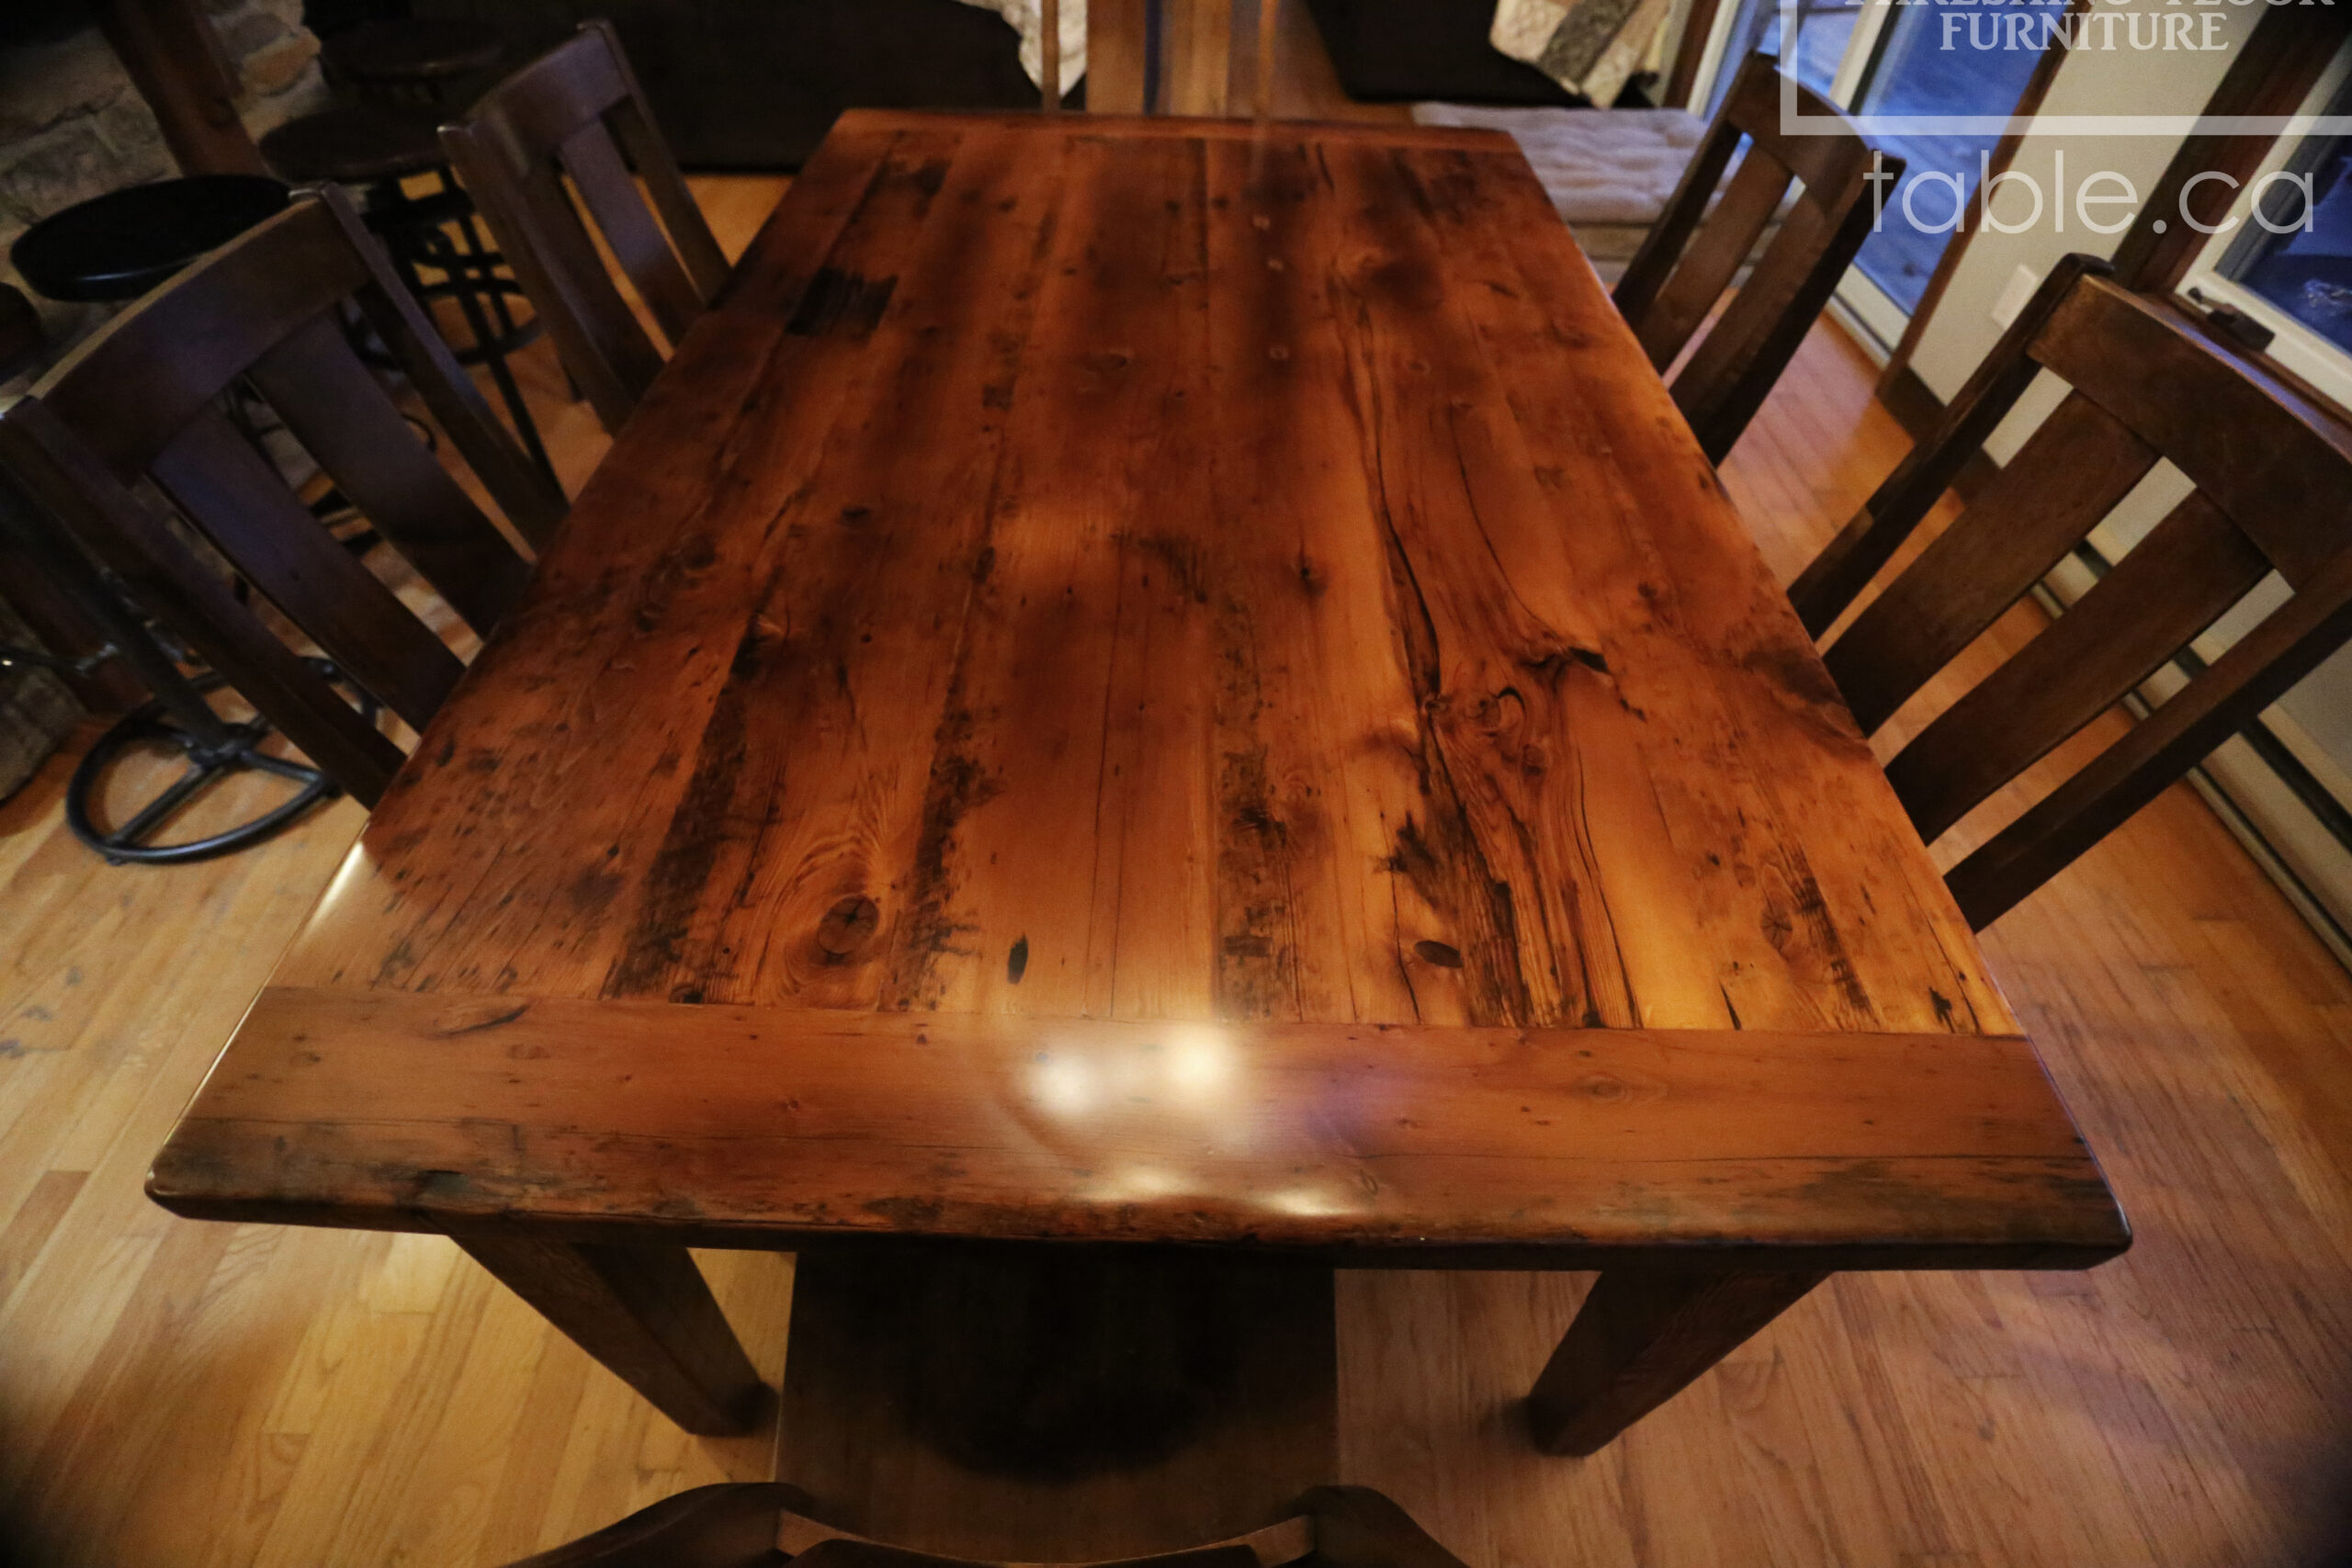 Project details: 70” Reclaimed Ontario Barnwood Table we made for a Sudbury, Ontario home - 42" wide – Harvest Base: Tapered [no notch] Windbrace Beam Legs - Old Growth Hemlock Threshing Floor Construction – Bread edge Ends - Original edges & distressing maintained - Premium epoxy + satin polyurethane finish – One 18” Leaf Extension – 6 Eastbrook Chairs / Wormy Maple / Polyurethane clearcoat finish - www.table.ca